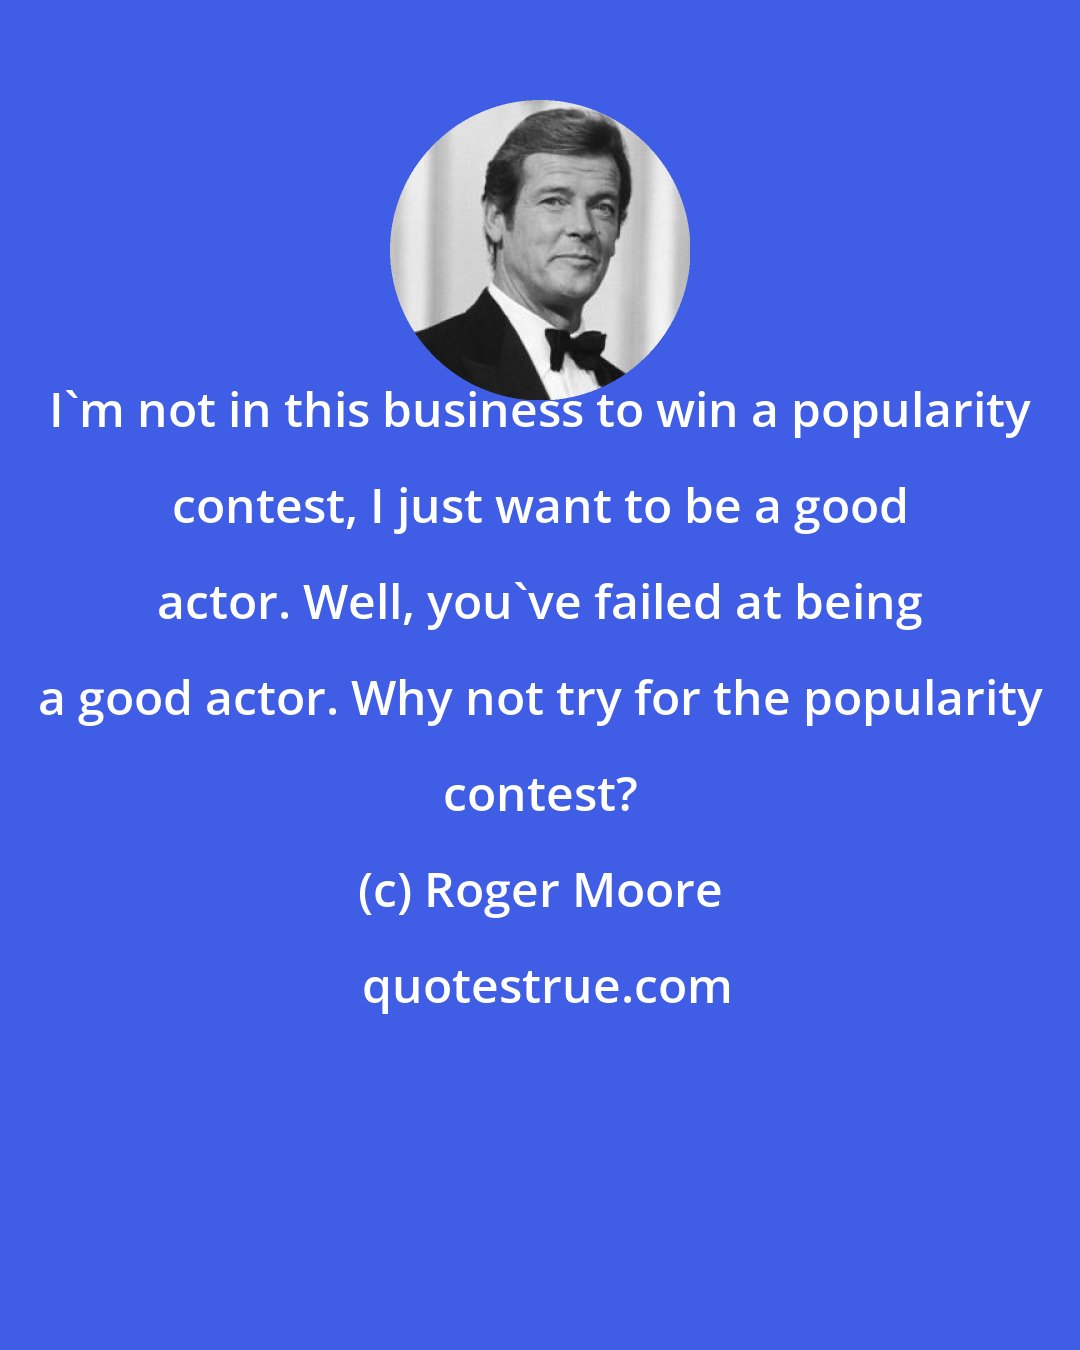 Roger Moore: I'm not in this business to win a popularity contest, I just want to be a good actor. Well, you've failed at being a good actor. Why not try for the popularity contest?